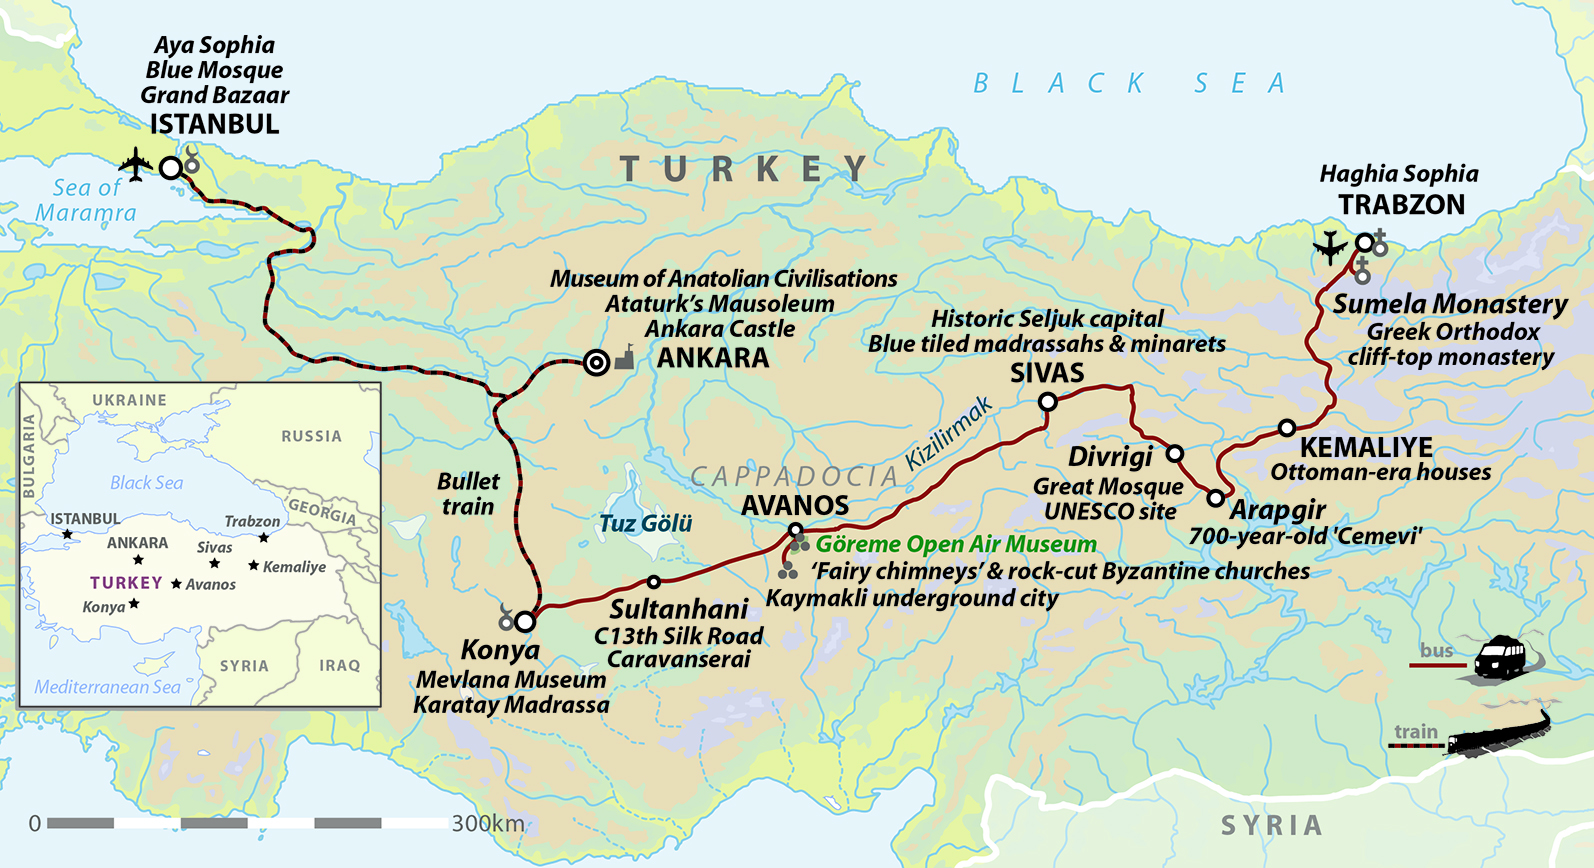 tourhub | Wild Frontiers | Turkey: From The Black Sea to The Golden Horn | Tour Map